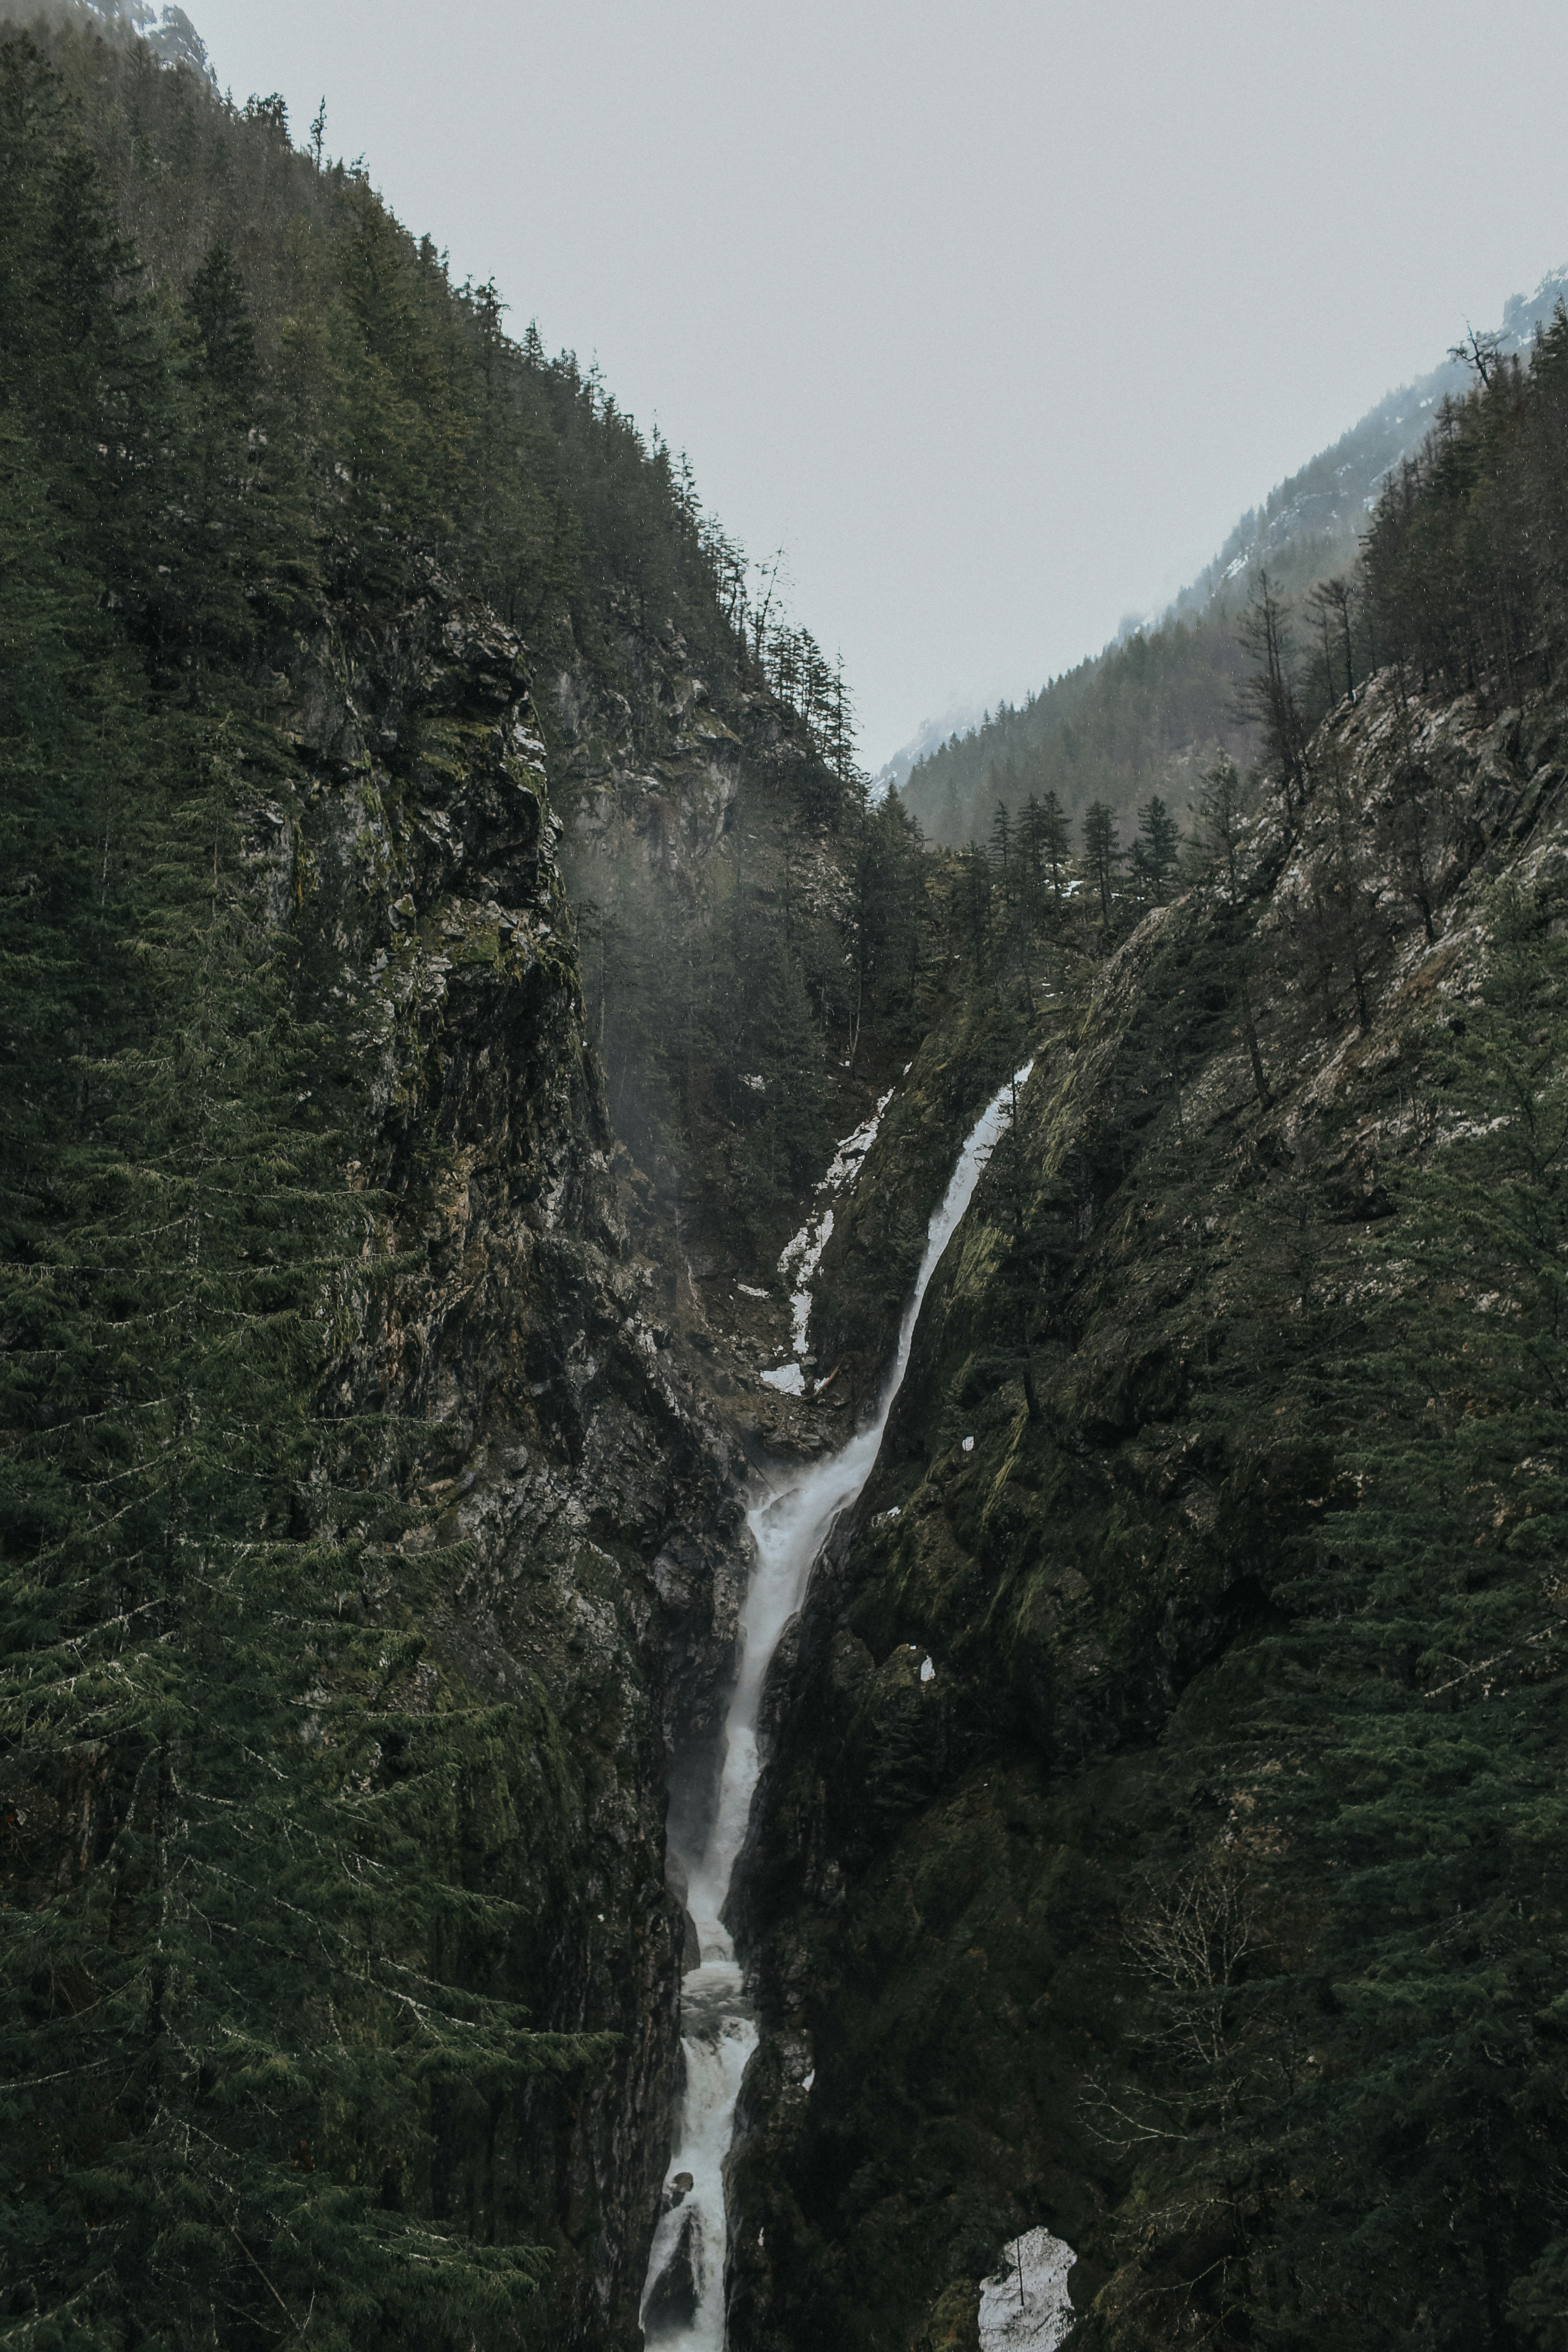 Taken on our way to Diablo Lake. I’d say this was better.